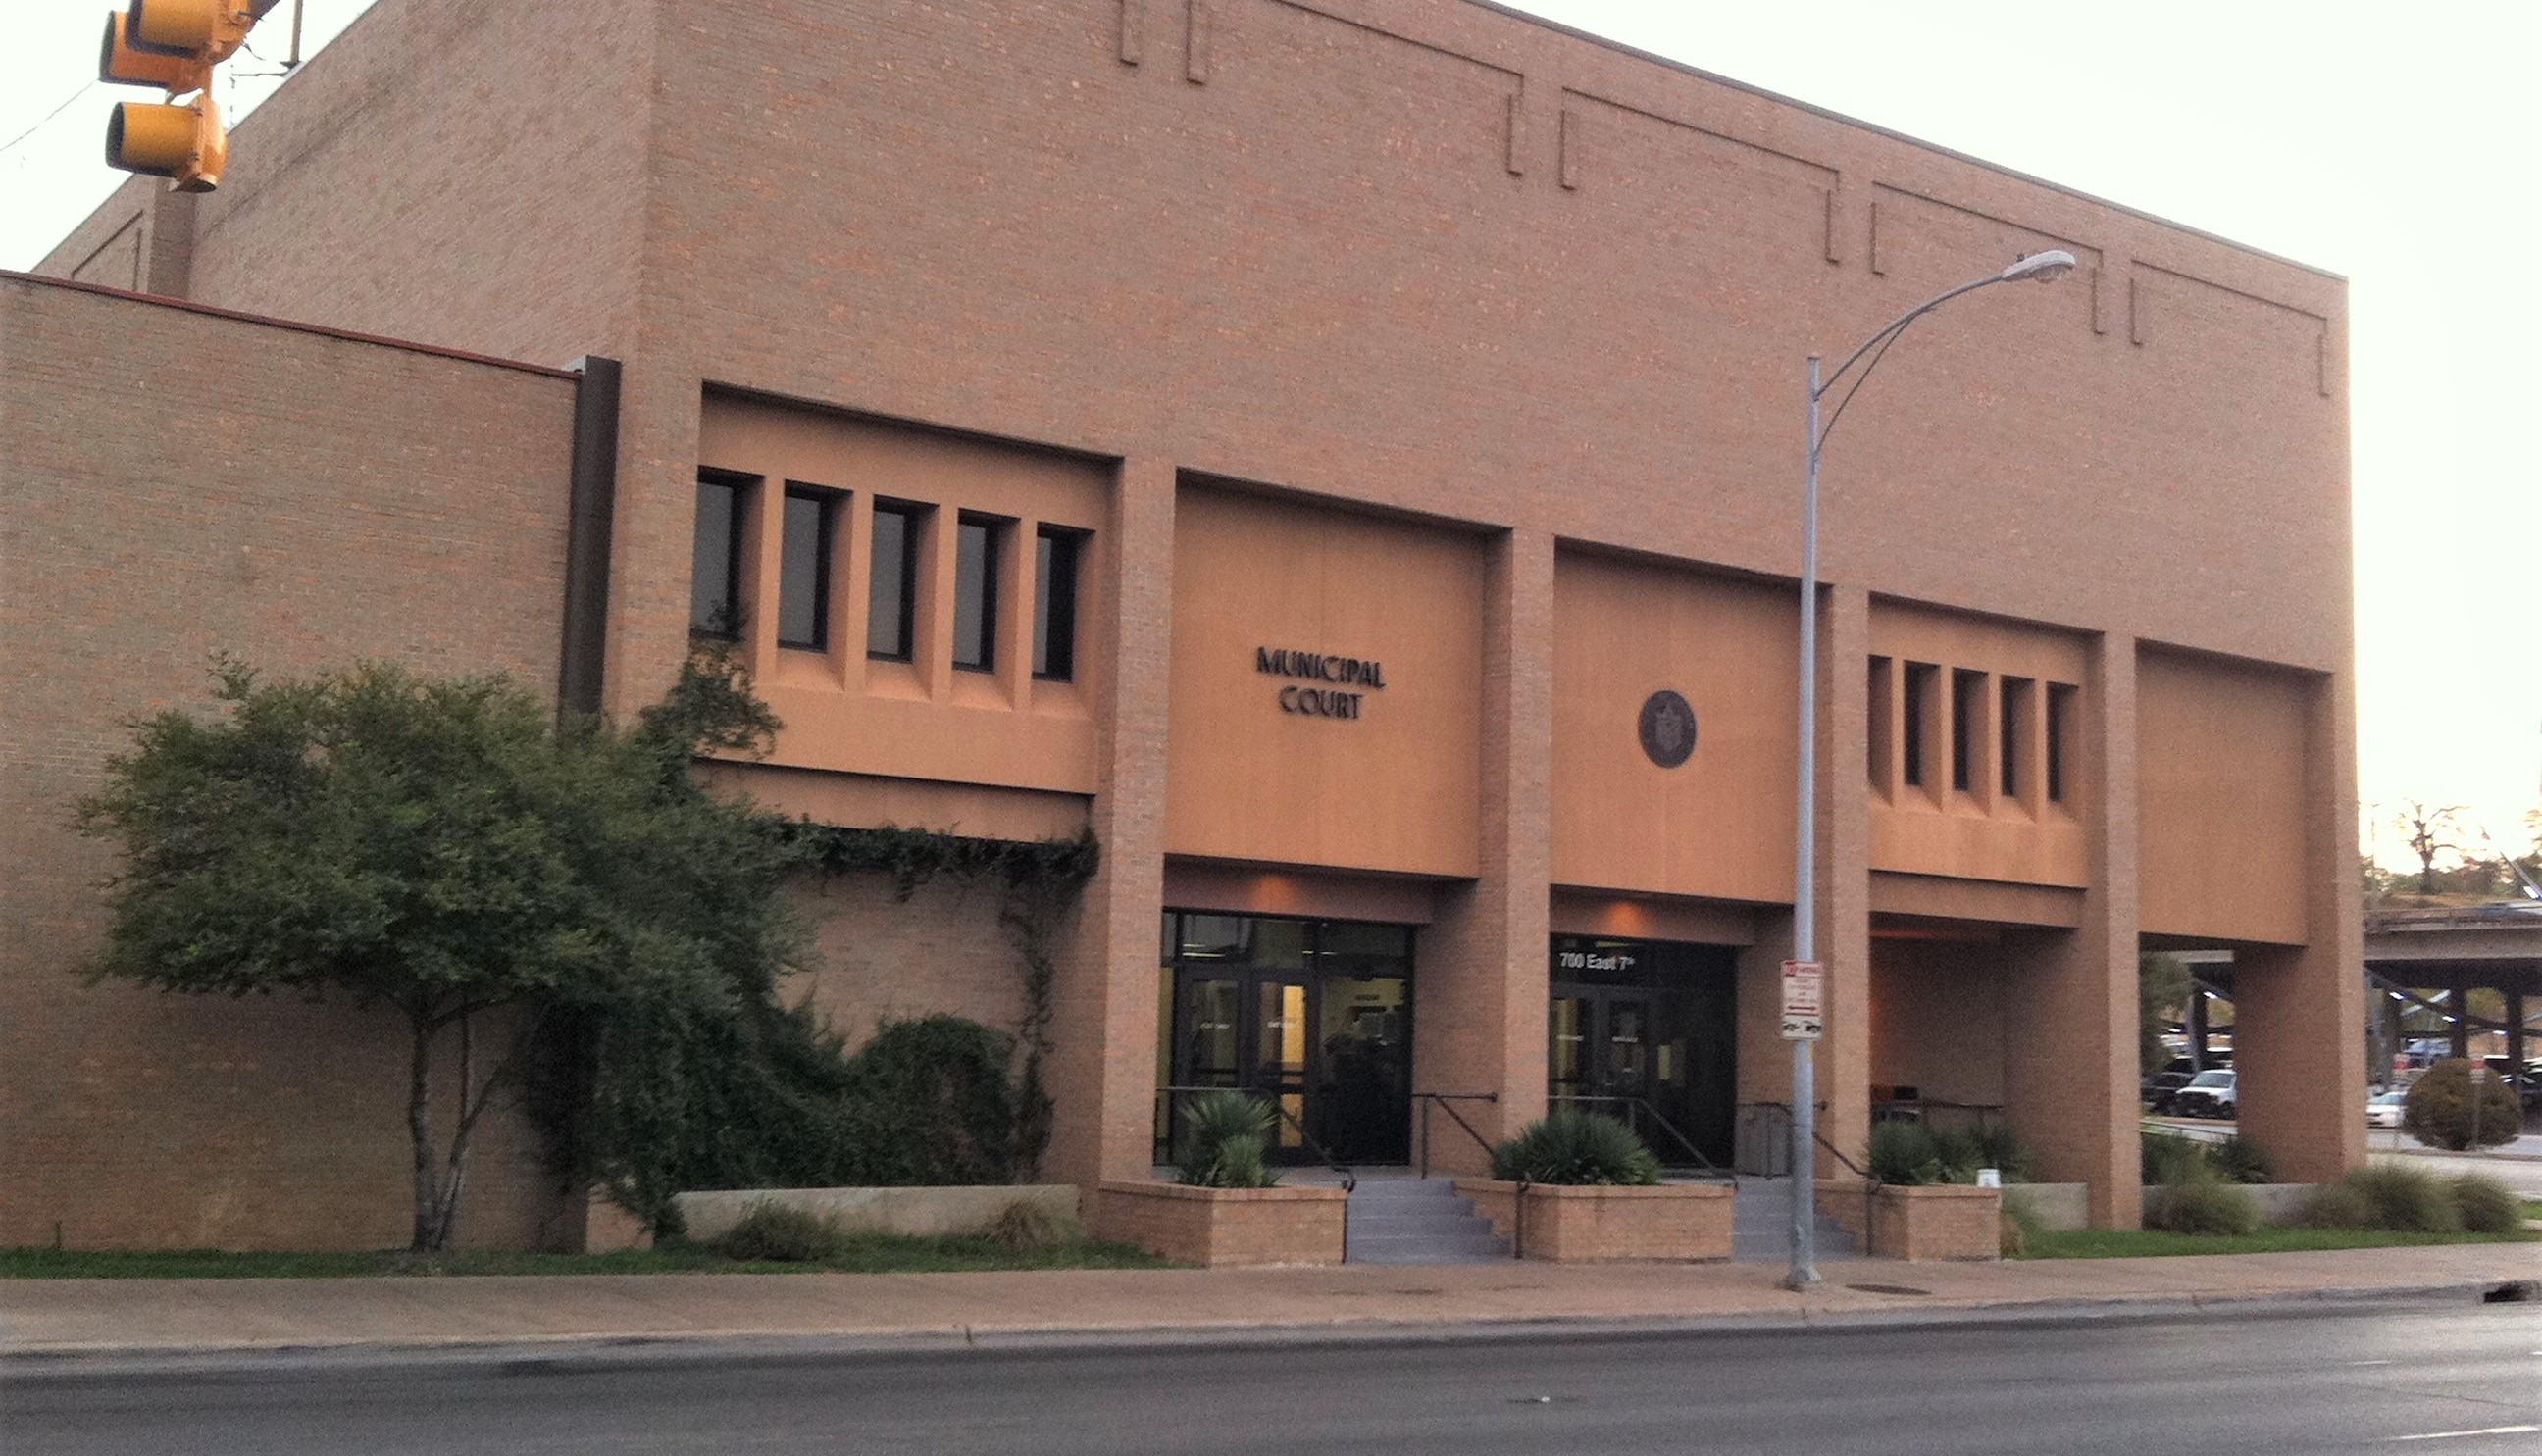 Image of the Municipal Court building